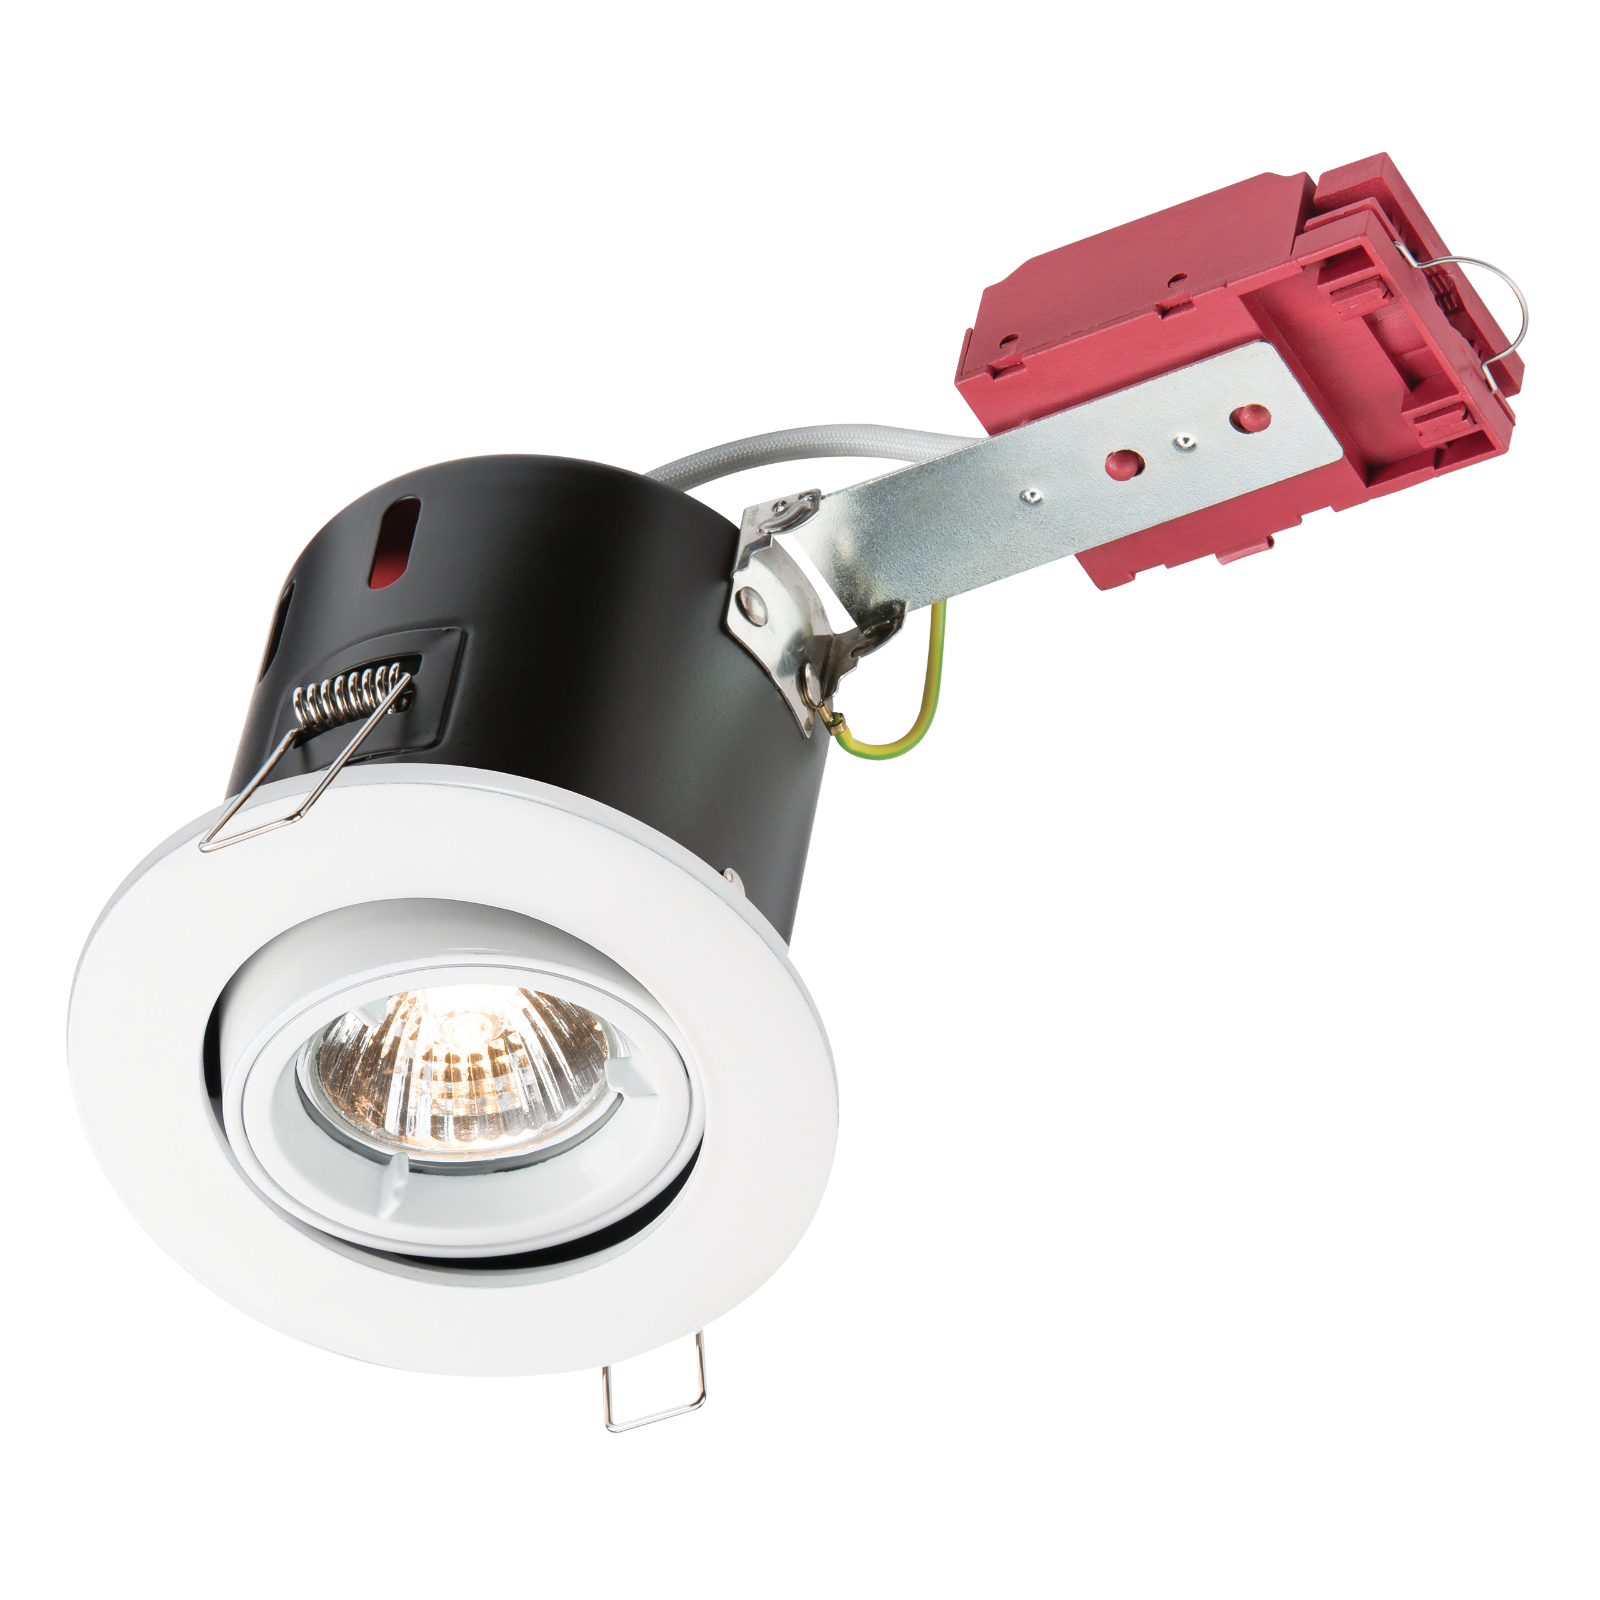 230V IP20 50W GU10 IC Fire-Rated Tilt Downlight White - VFRSGICW 